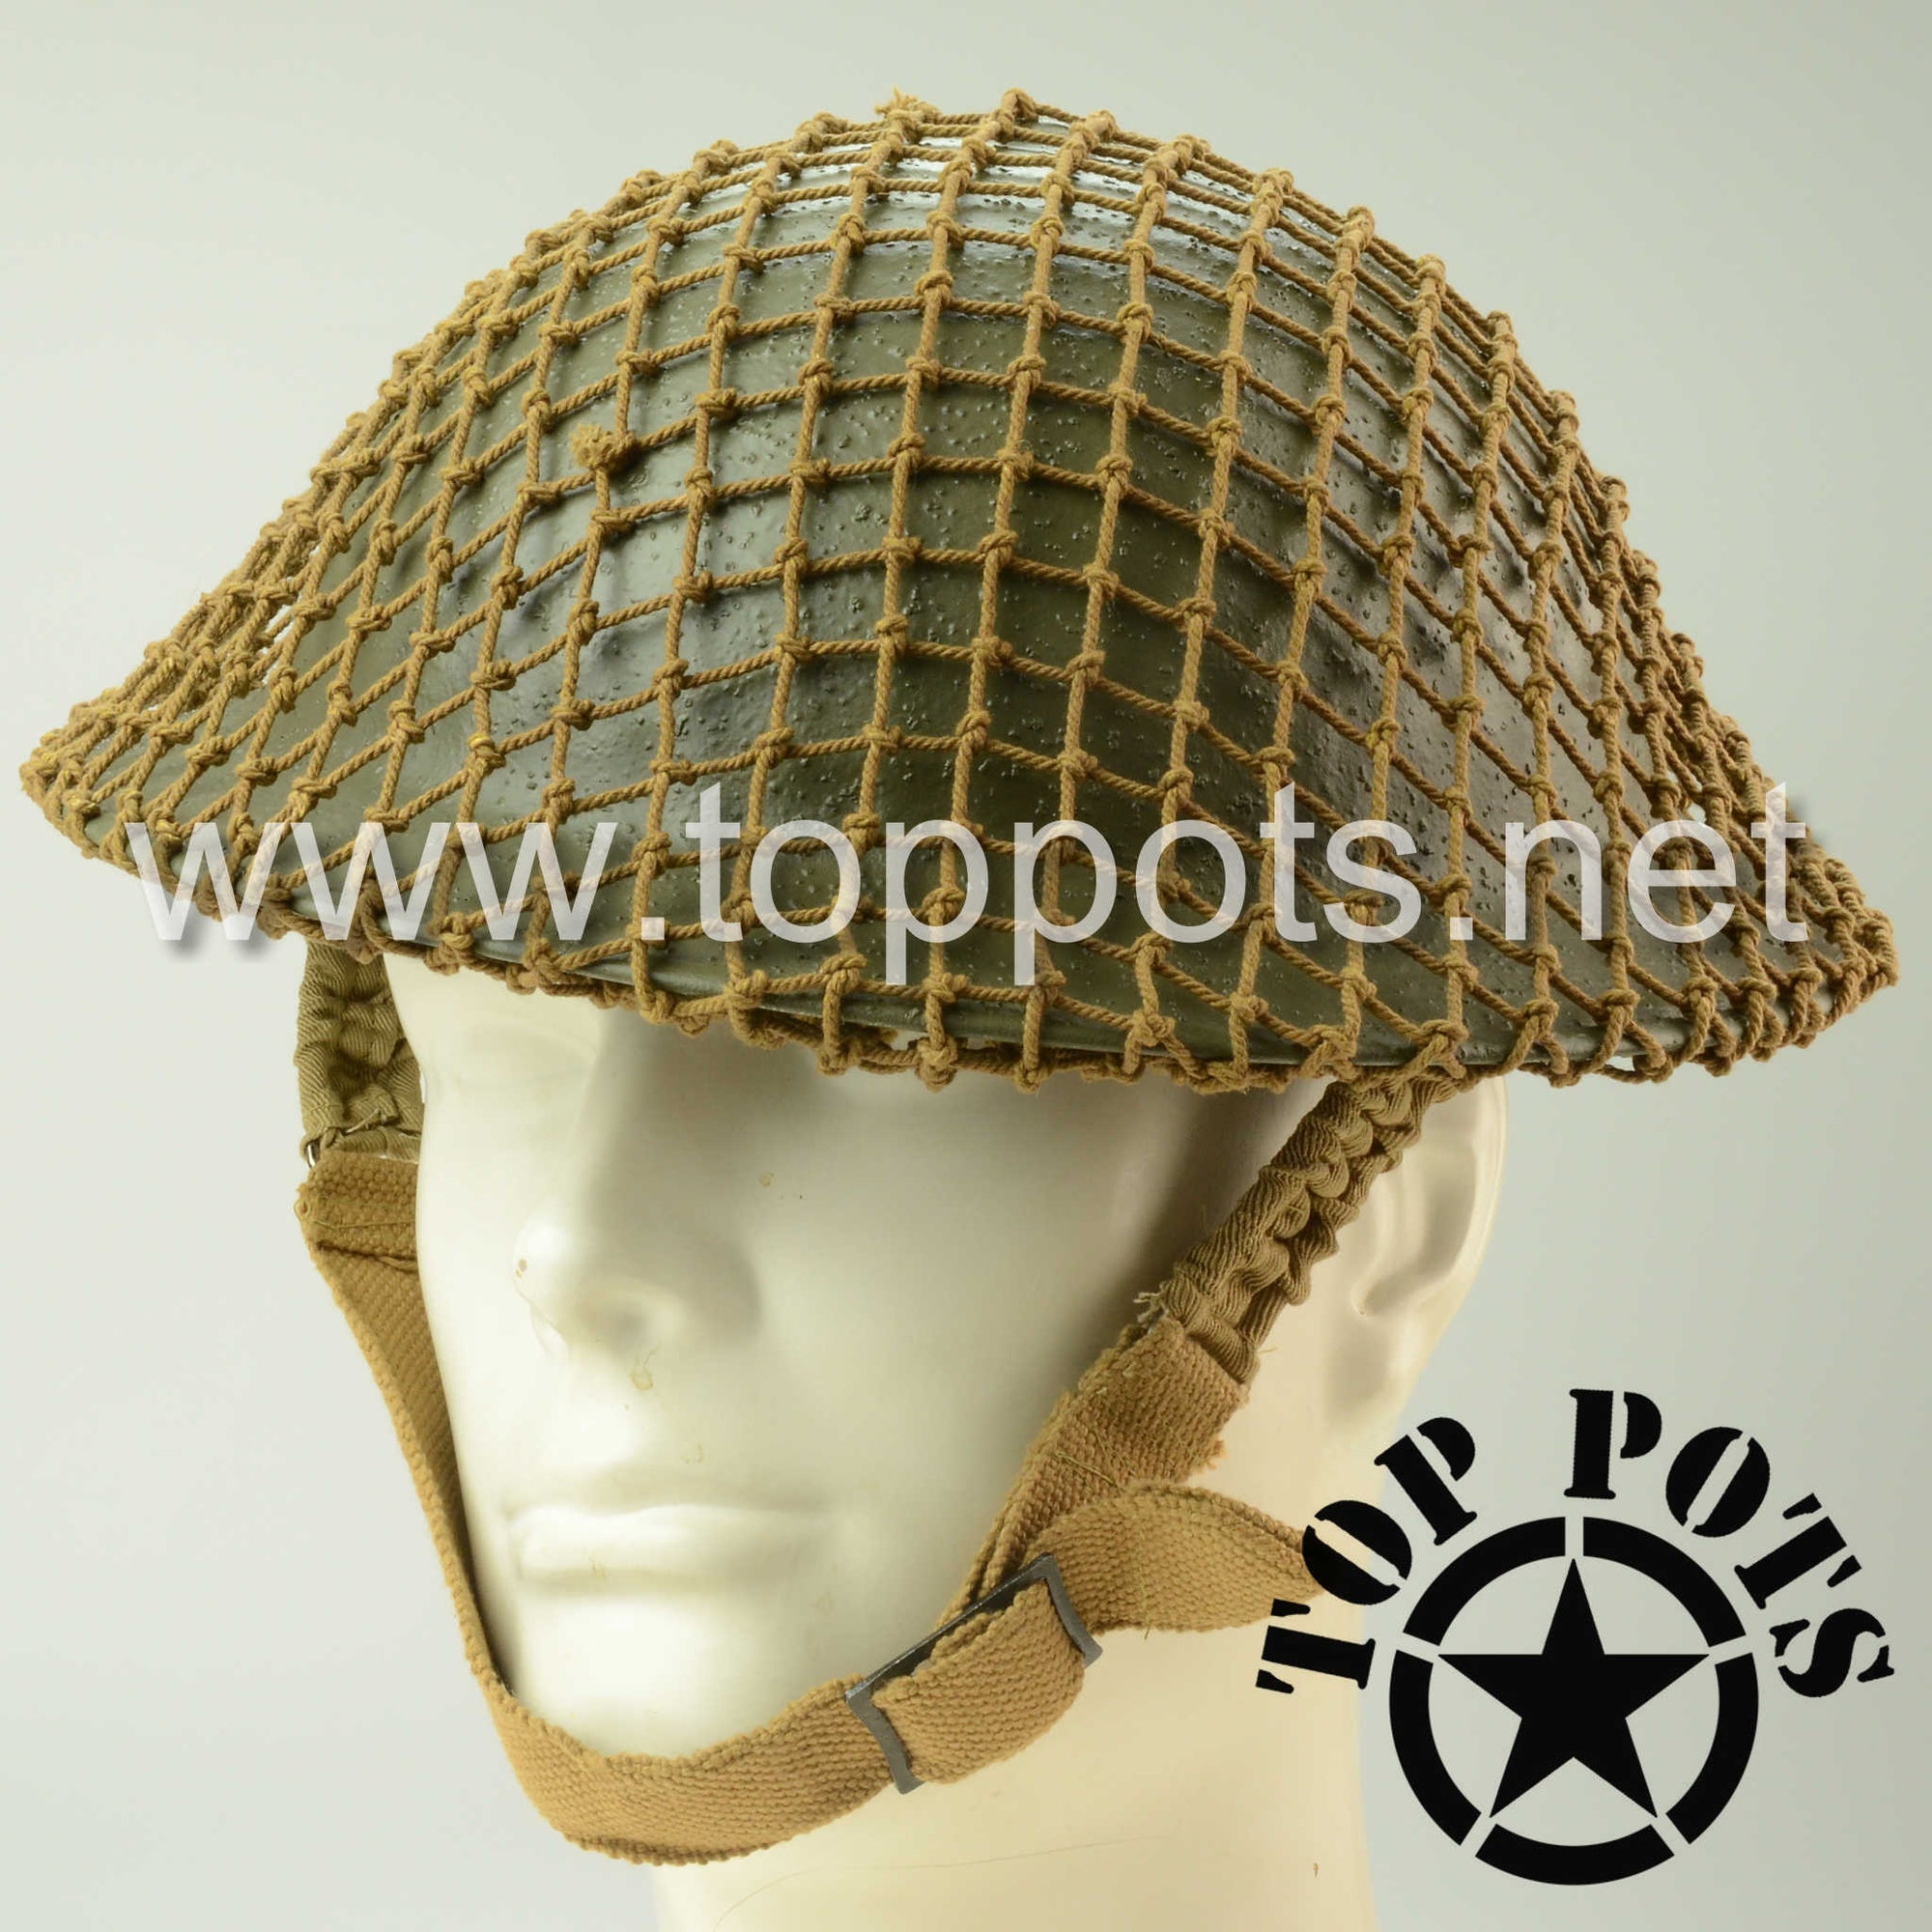 WWII Canadian Army Reproduction MKII MK2 Enlisted Brodie Helmet with Reproduction Helmet Net – Field Textured Finish